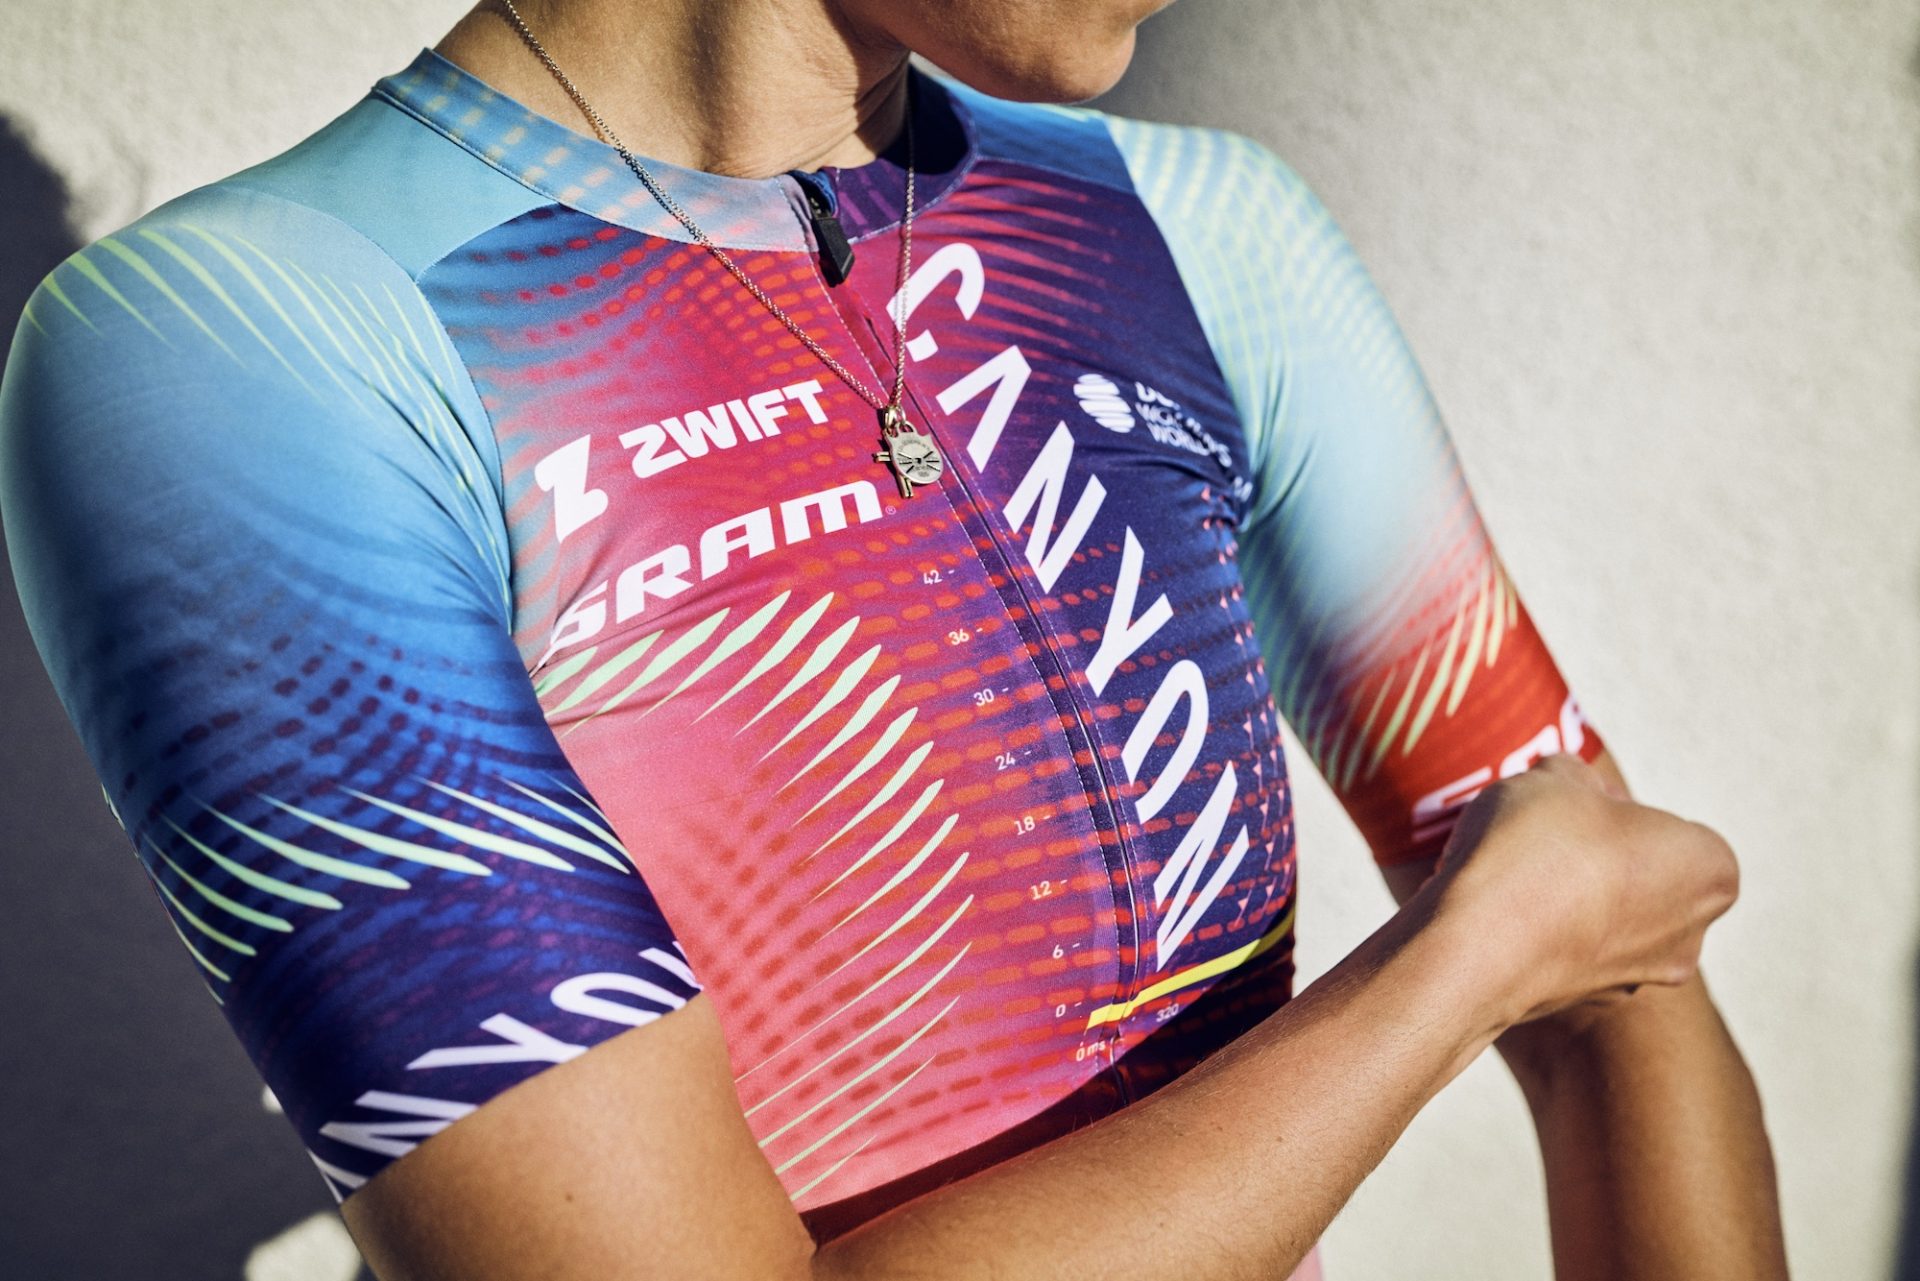 A close up of Canyon-SRAM's New Jersey, showing the geometric patterns of white that break up what would be solid color blocks. The design has a kind of fractal-geometry appearance to it.